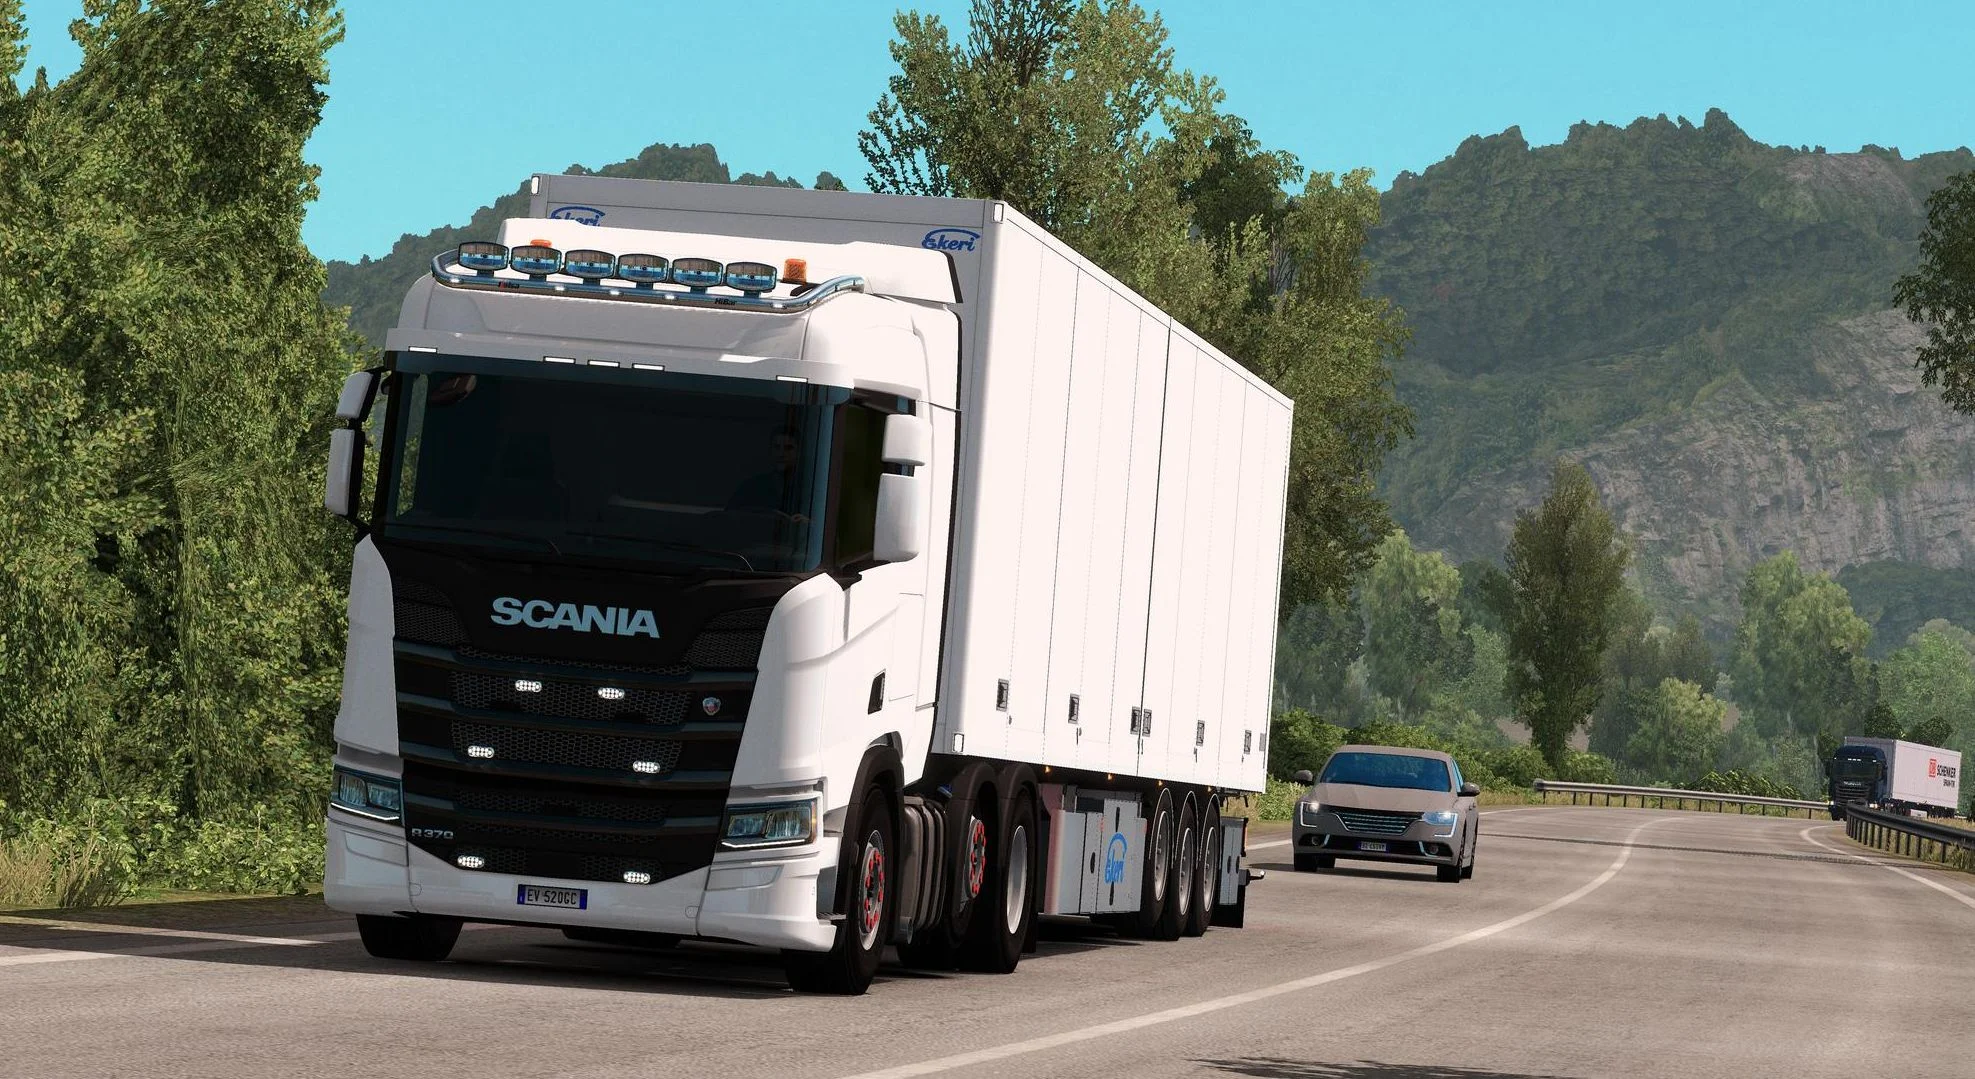 Euro Truck Simulator 2 will have a secret location that you will need to find yourself